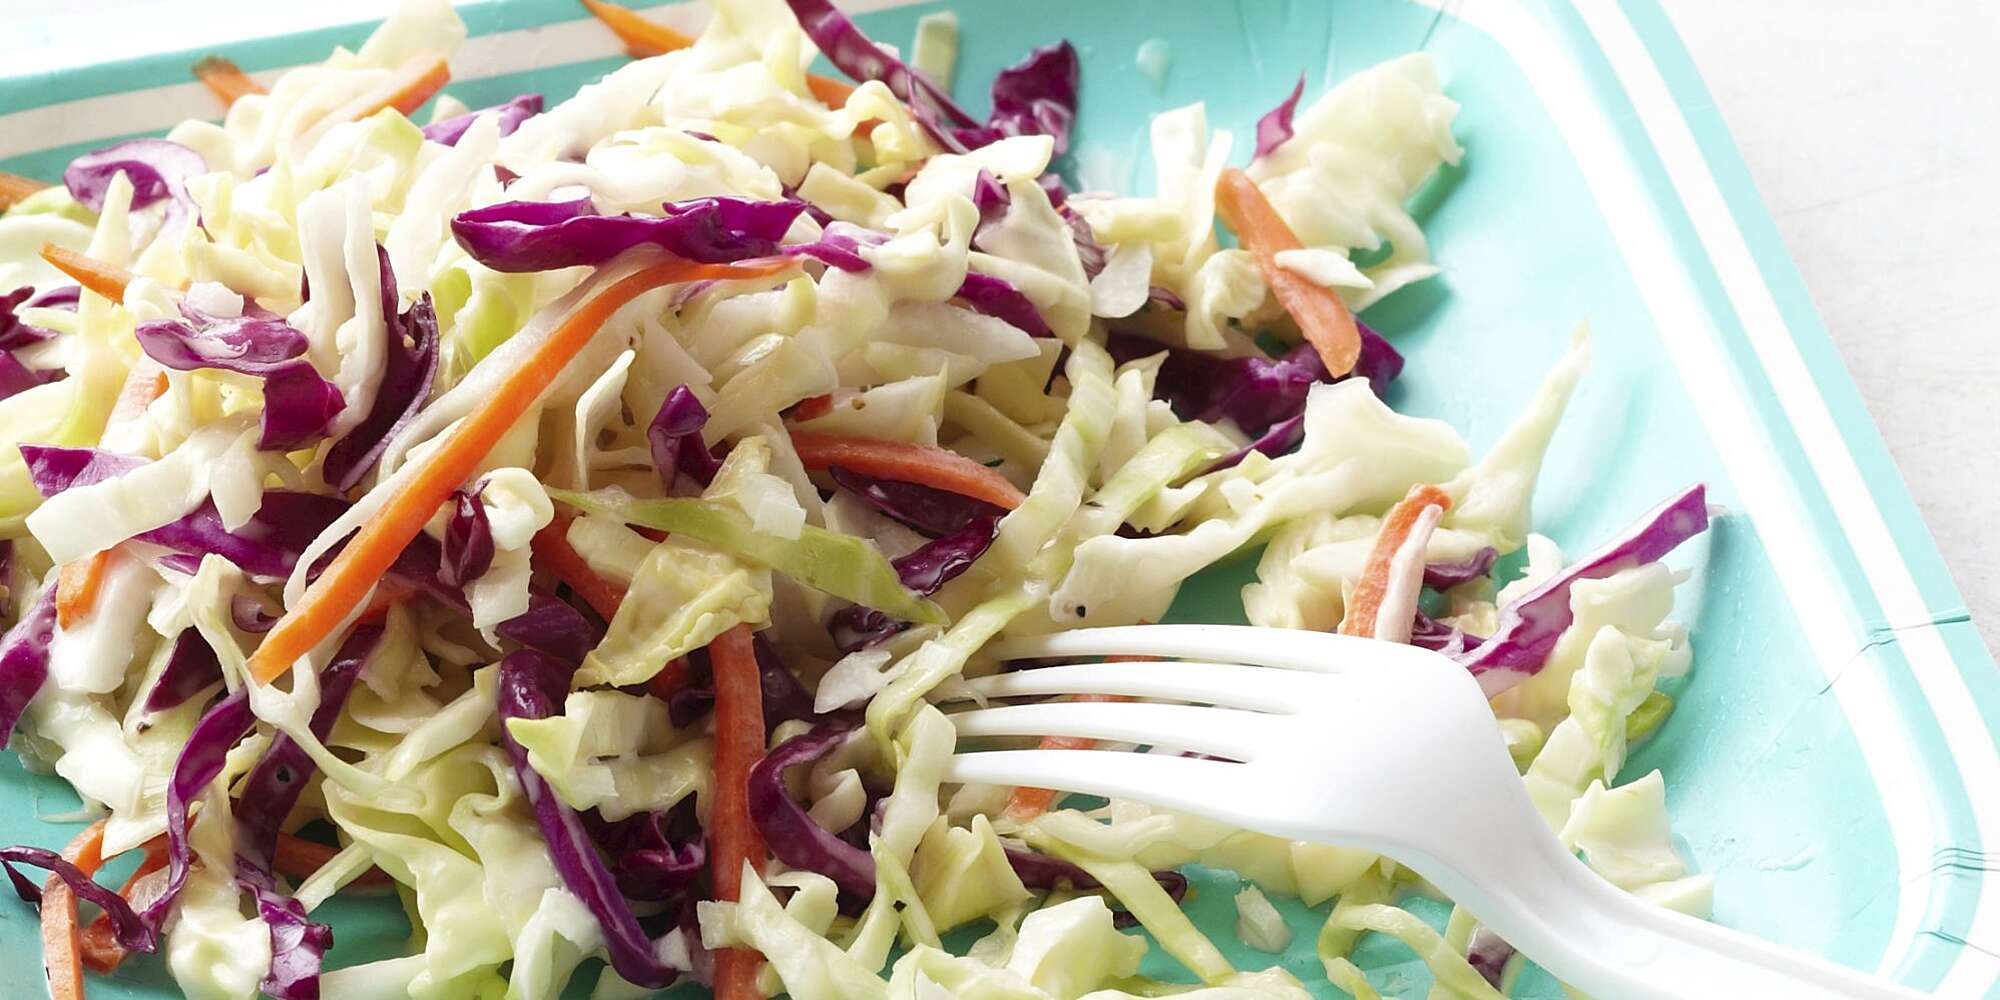 How do you keep coleslaw from getting bitter?